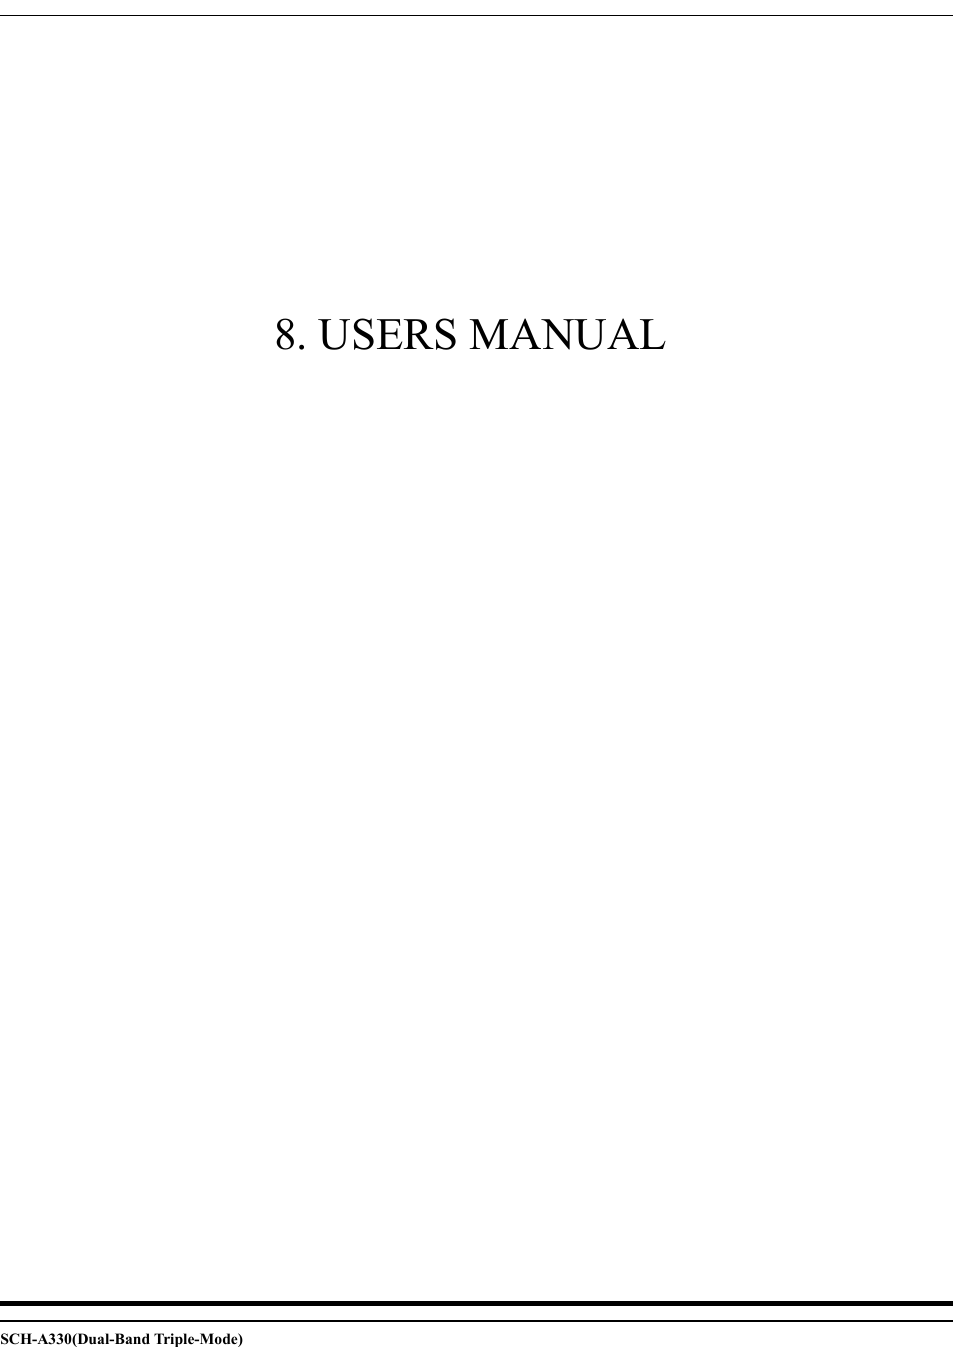       8. USERS MANUAL                              SCH-A330(Dual-Band Triple-Mode) 